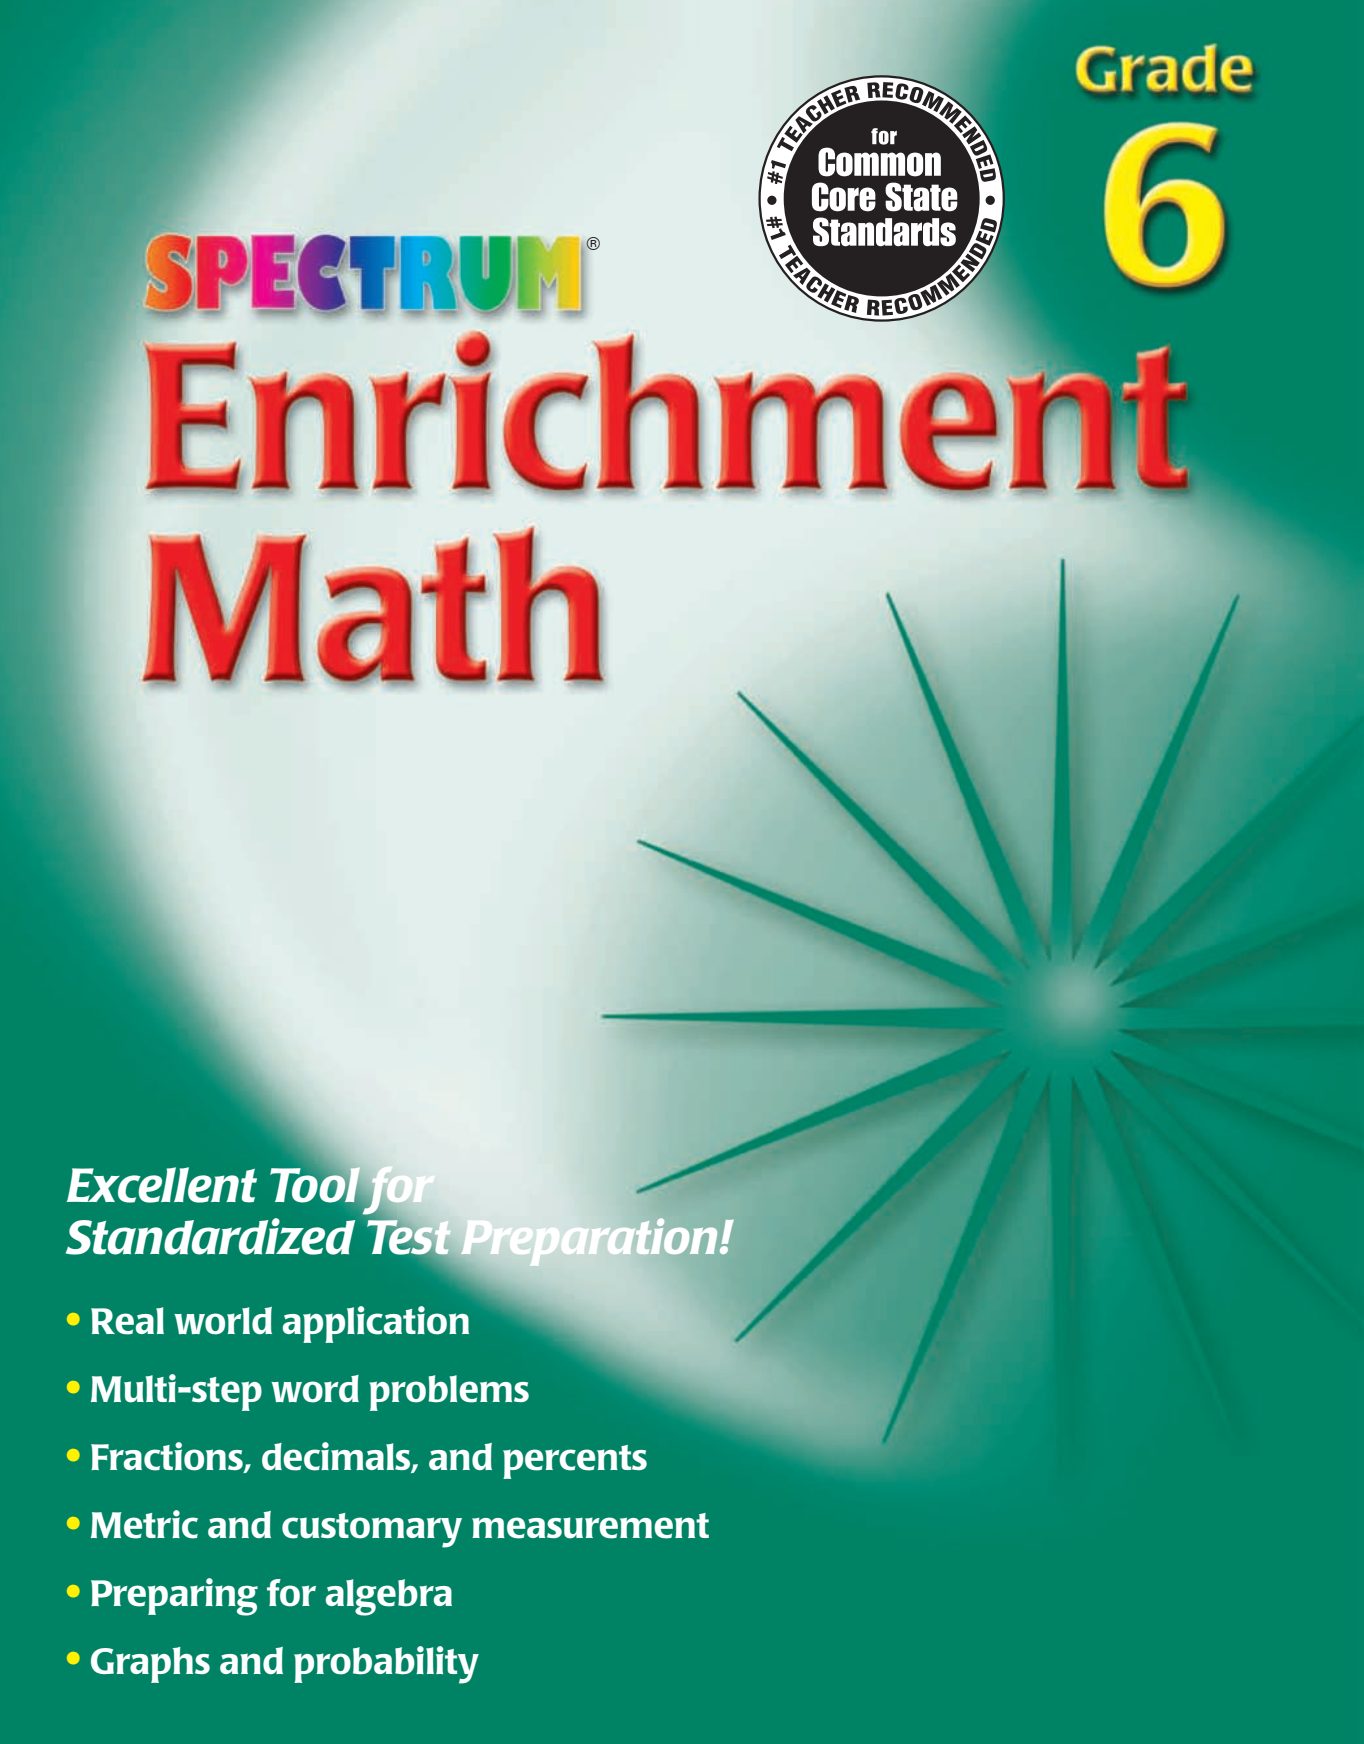 Rich Results on Google's SERP when searching for 'Spectrum Enrichment Math 6'